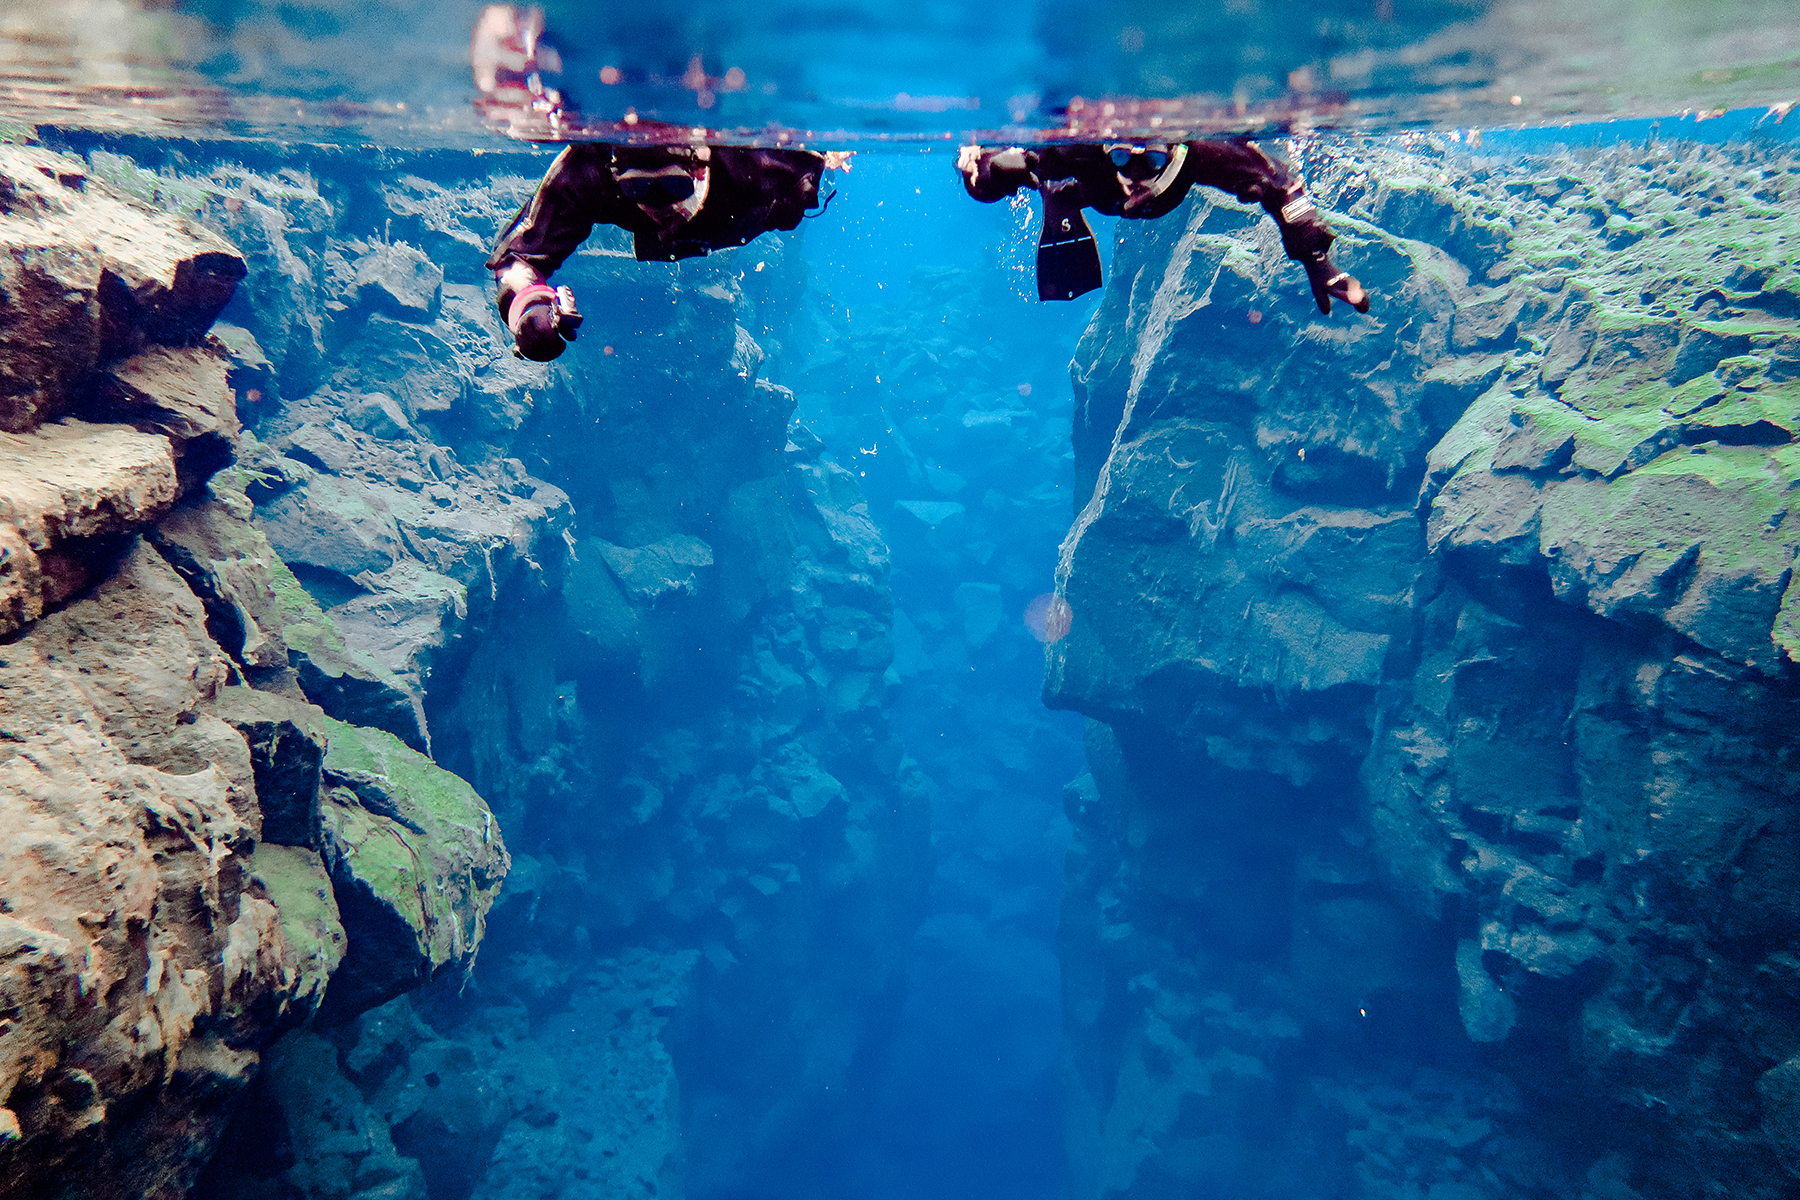 Alyssa Campanella and Torrance Coombs of The A List experience snorkeling Silfra with DIVE.IS in Iceland